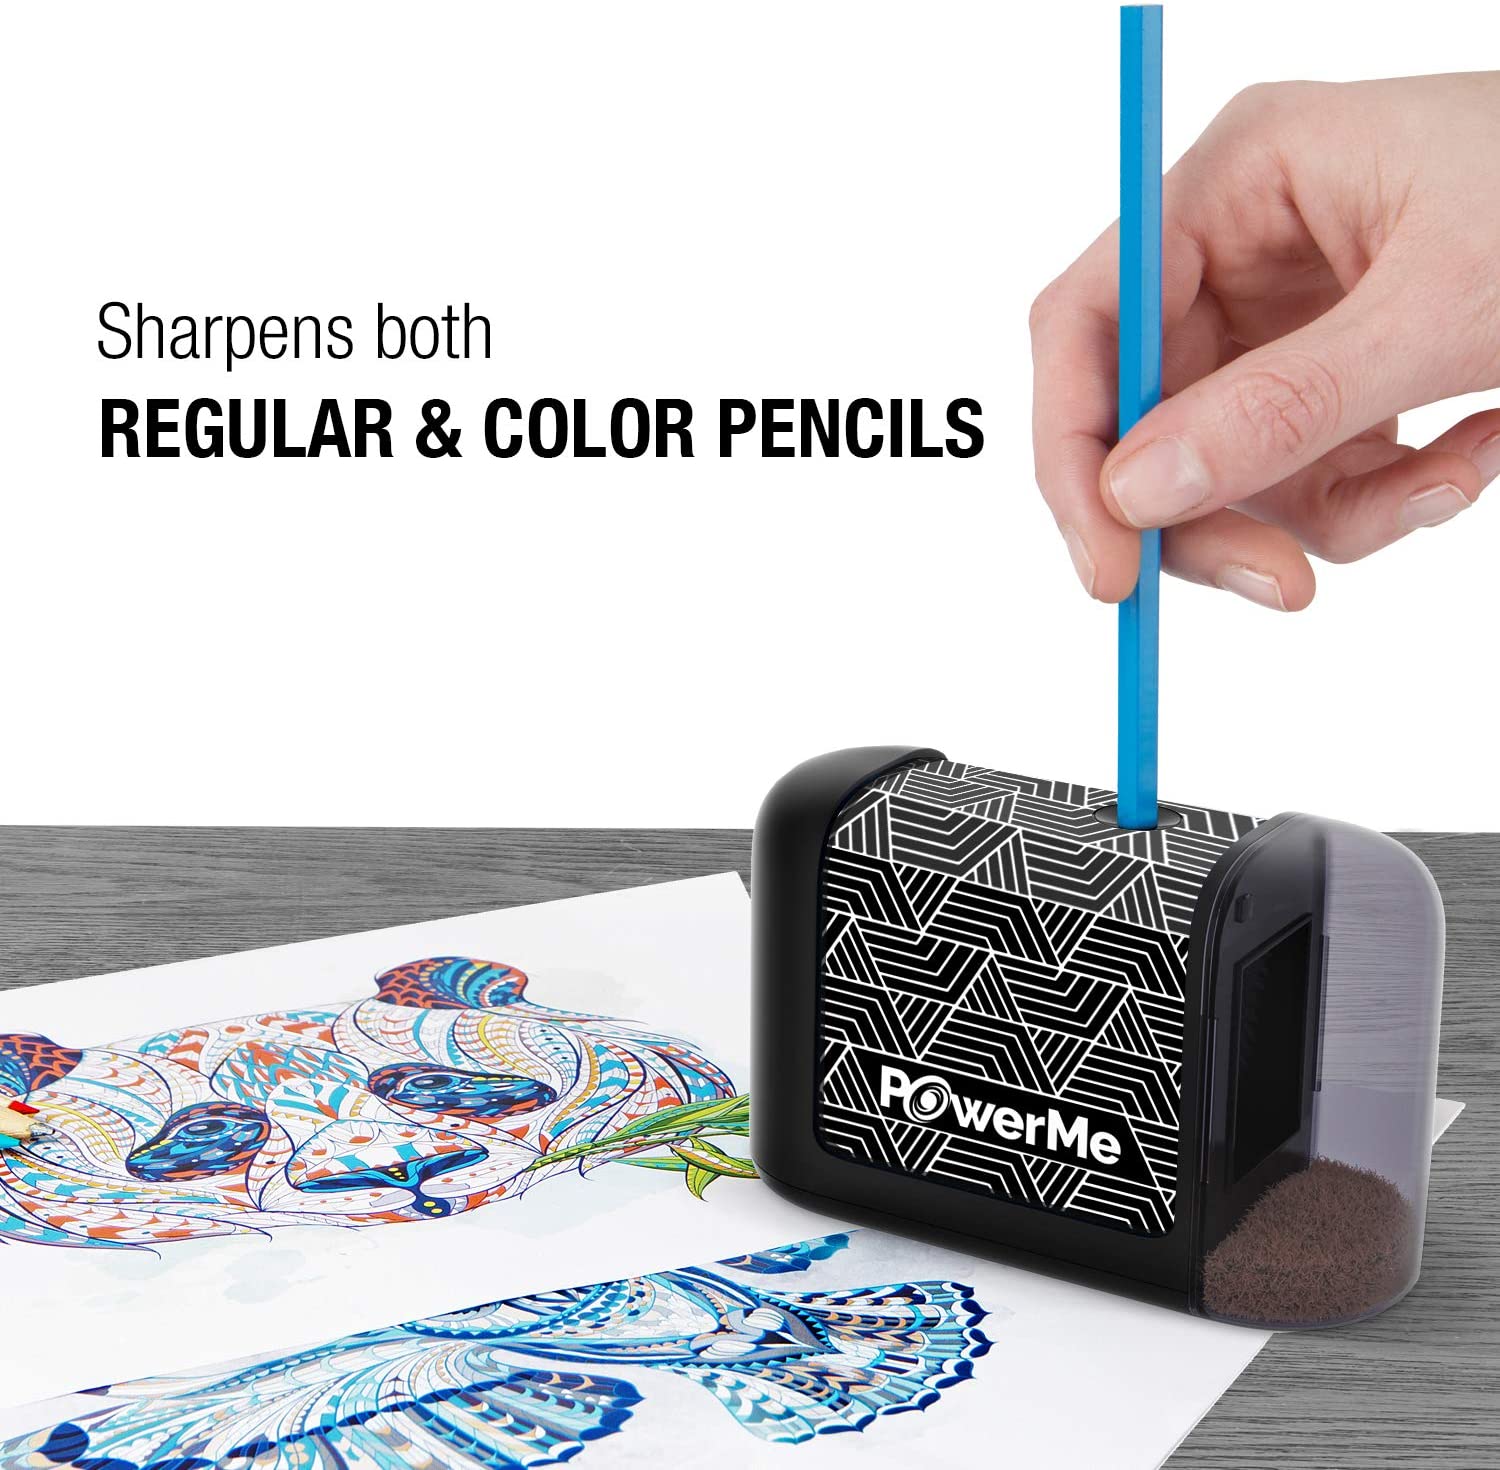 a hand holding a pencil sharpener with text: 'Sharpens both REGULAR & COLOR PENCILS PowerMe'